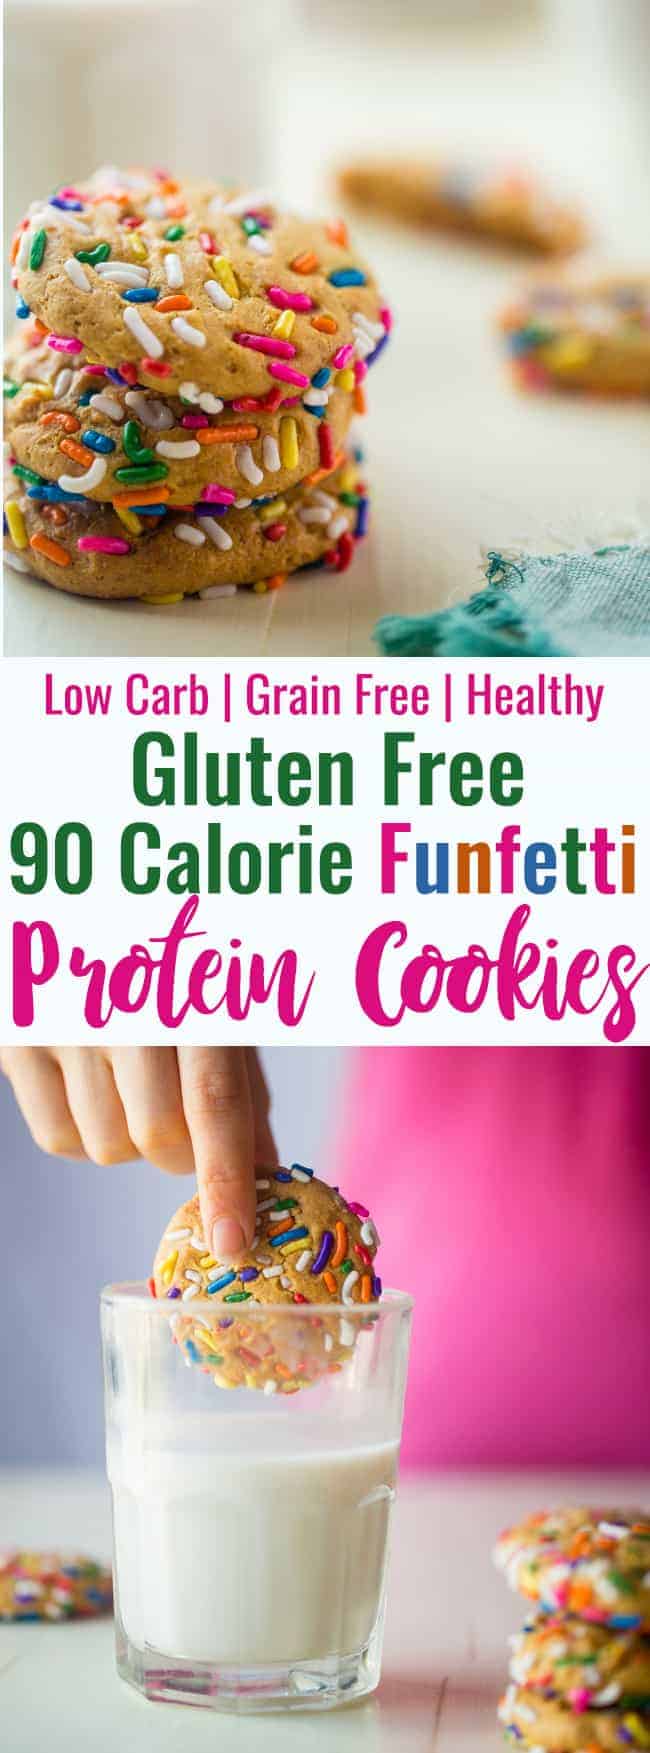 Funfetti Protein Cookies - These quick and easy cookies taste just like funfetti cake! You'll never know they're a healthy, protein-packed and gluten free treat for under 90 calories and 2 Freestyle SmartPoints! | #Foodfaithfit | #GlutenFree #LowCarb #WeightWatchers #Healthy #ProteinPowder